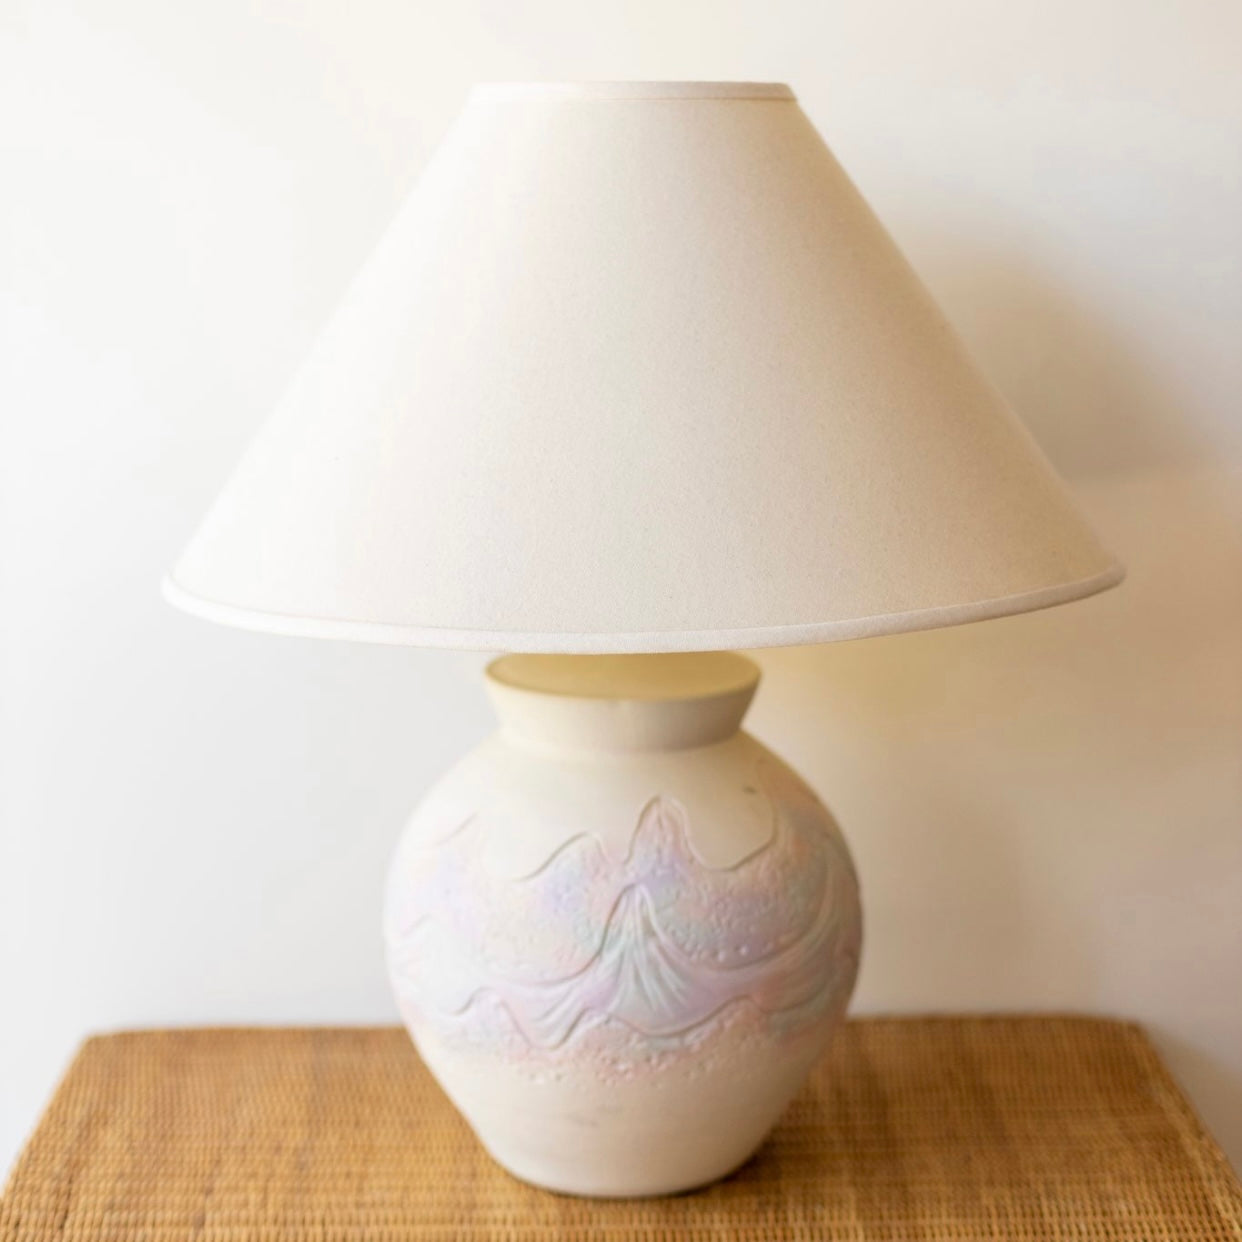 80s Modern Painted Ceramic Lamp, Local Pick Up Only